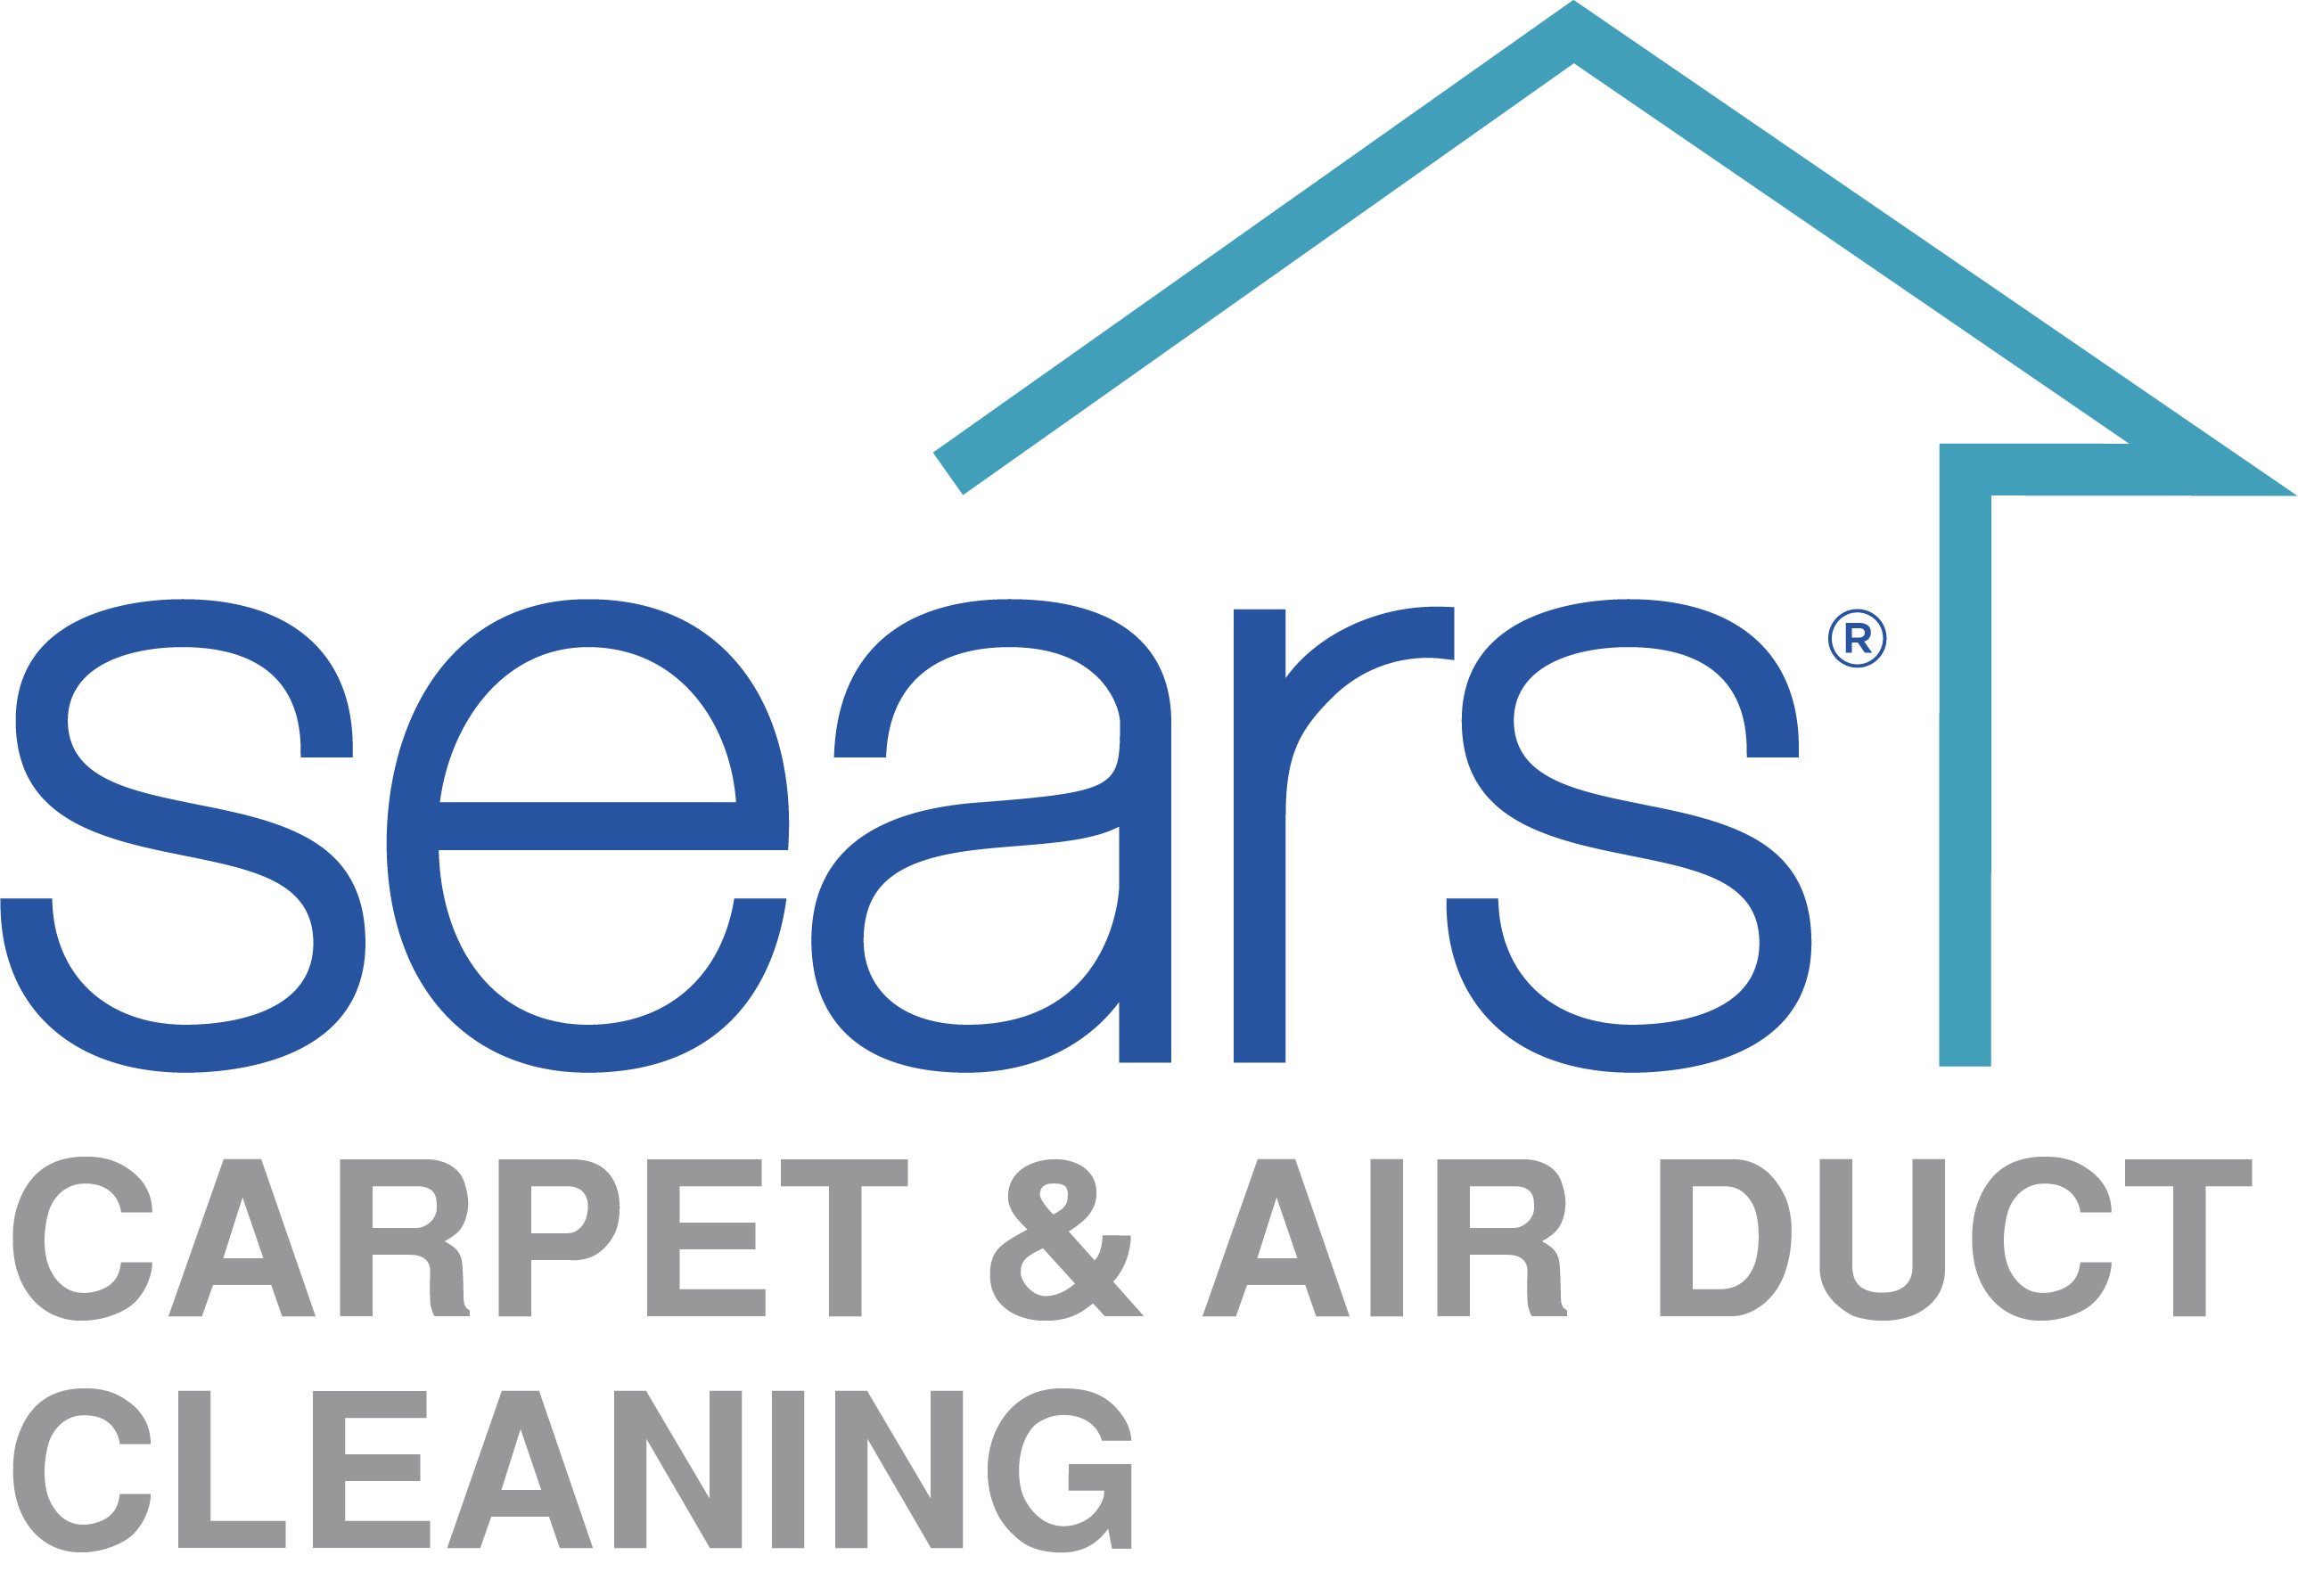 Sears Carpet & Air Duct Cleaning - Colorado